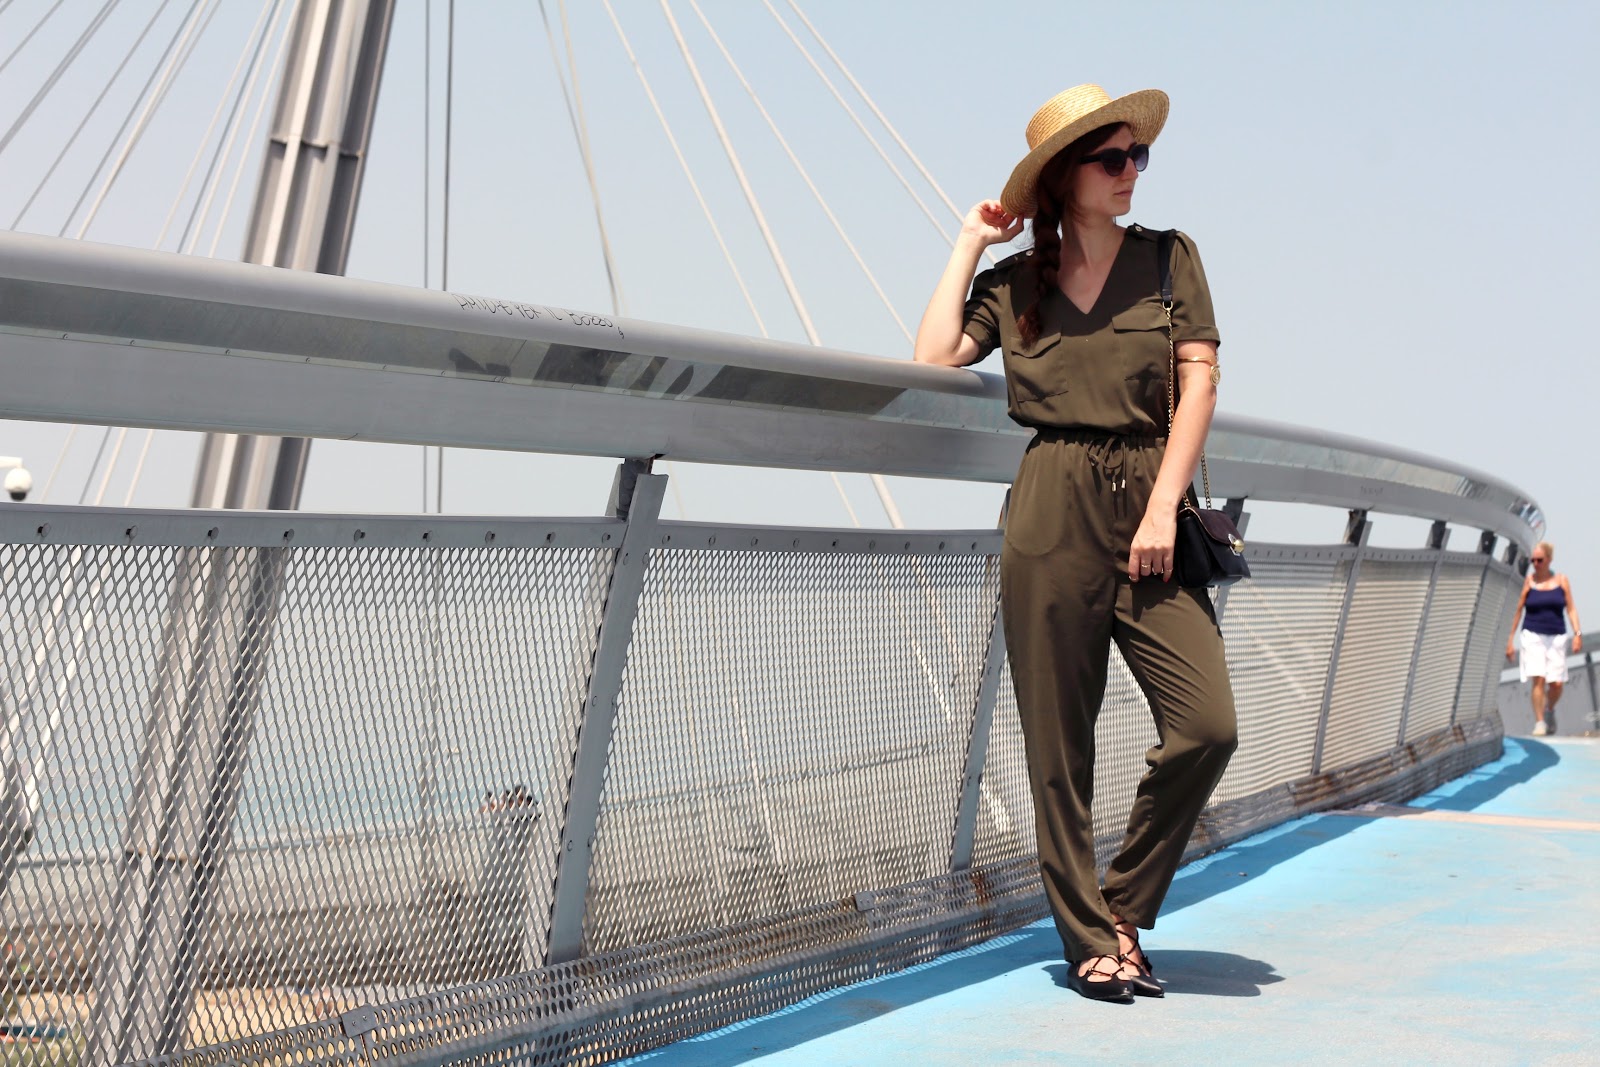 ashion style blogger outfit ootd italian girl italy trend vogue glamour pescara ponte del mare ovs ovspeople jumpsuit military green straw hat cappello paglia hm estate tutina ballerine stringate lacci lace up ballet shoes flats zara bag borsa tracolla ring middle finger